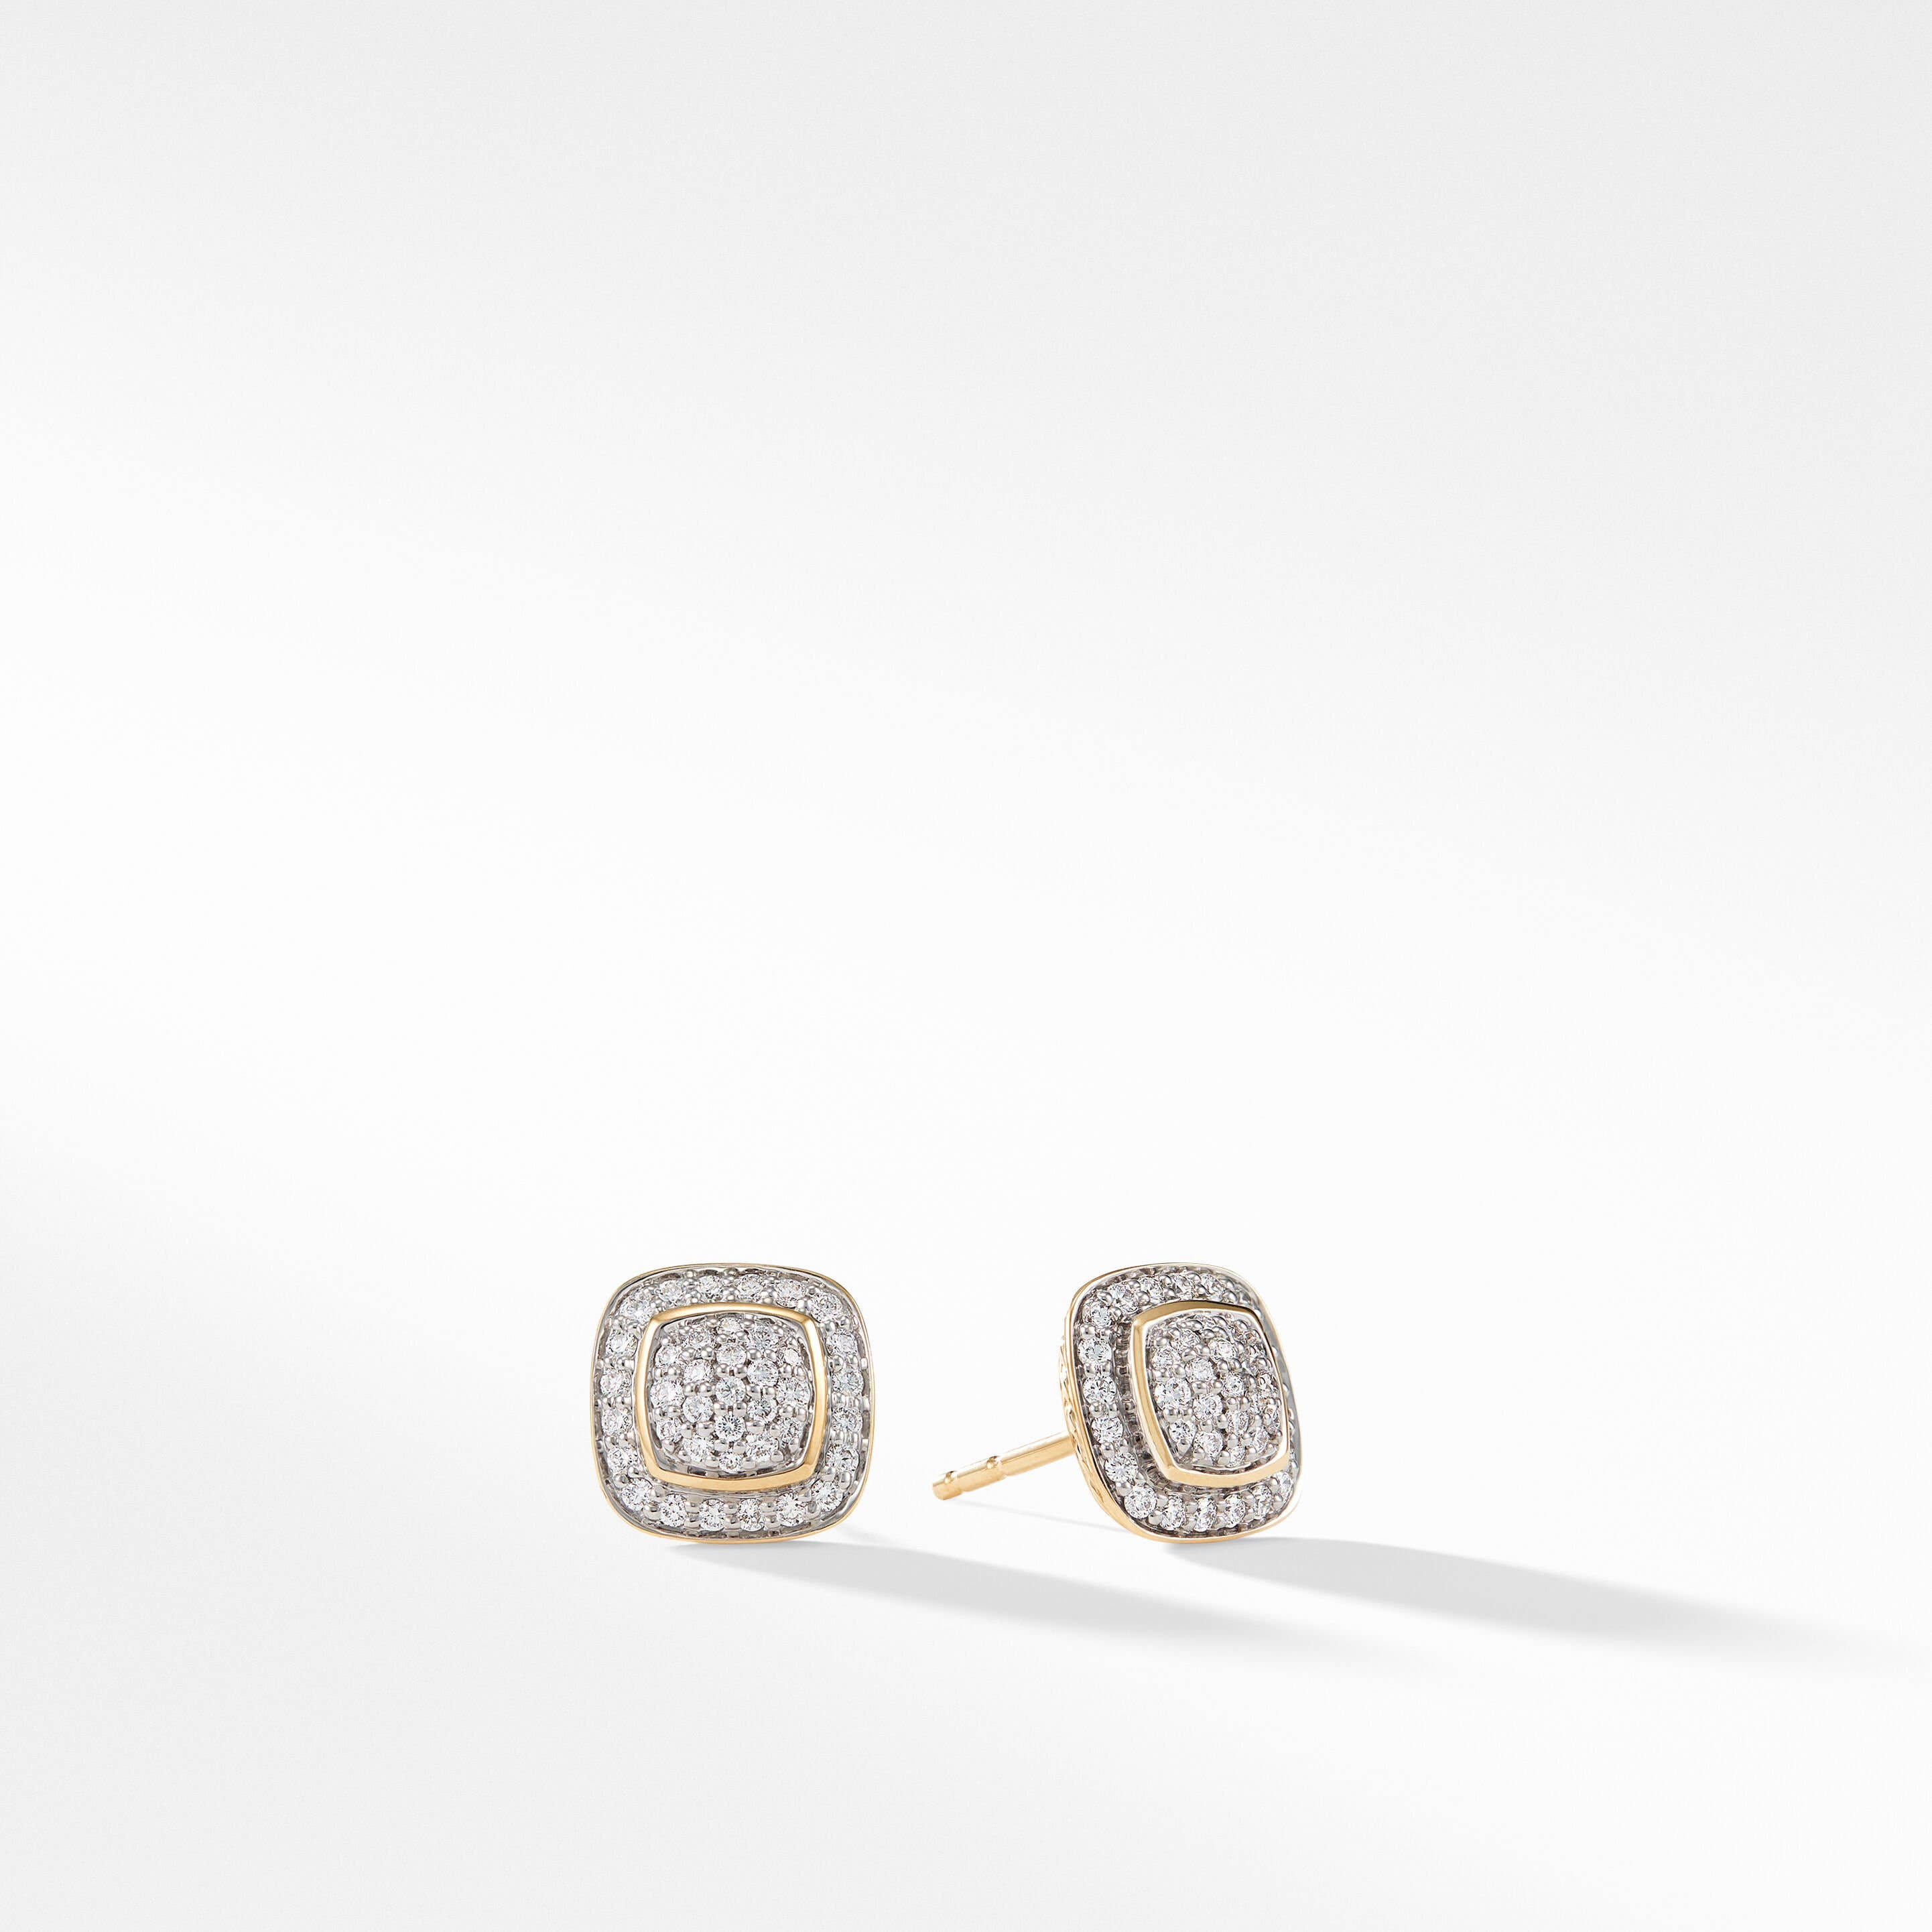 Petite Albion® Stud Earrings in 18K Yellow Gold with Pavé Diamonds